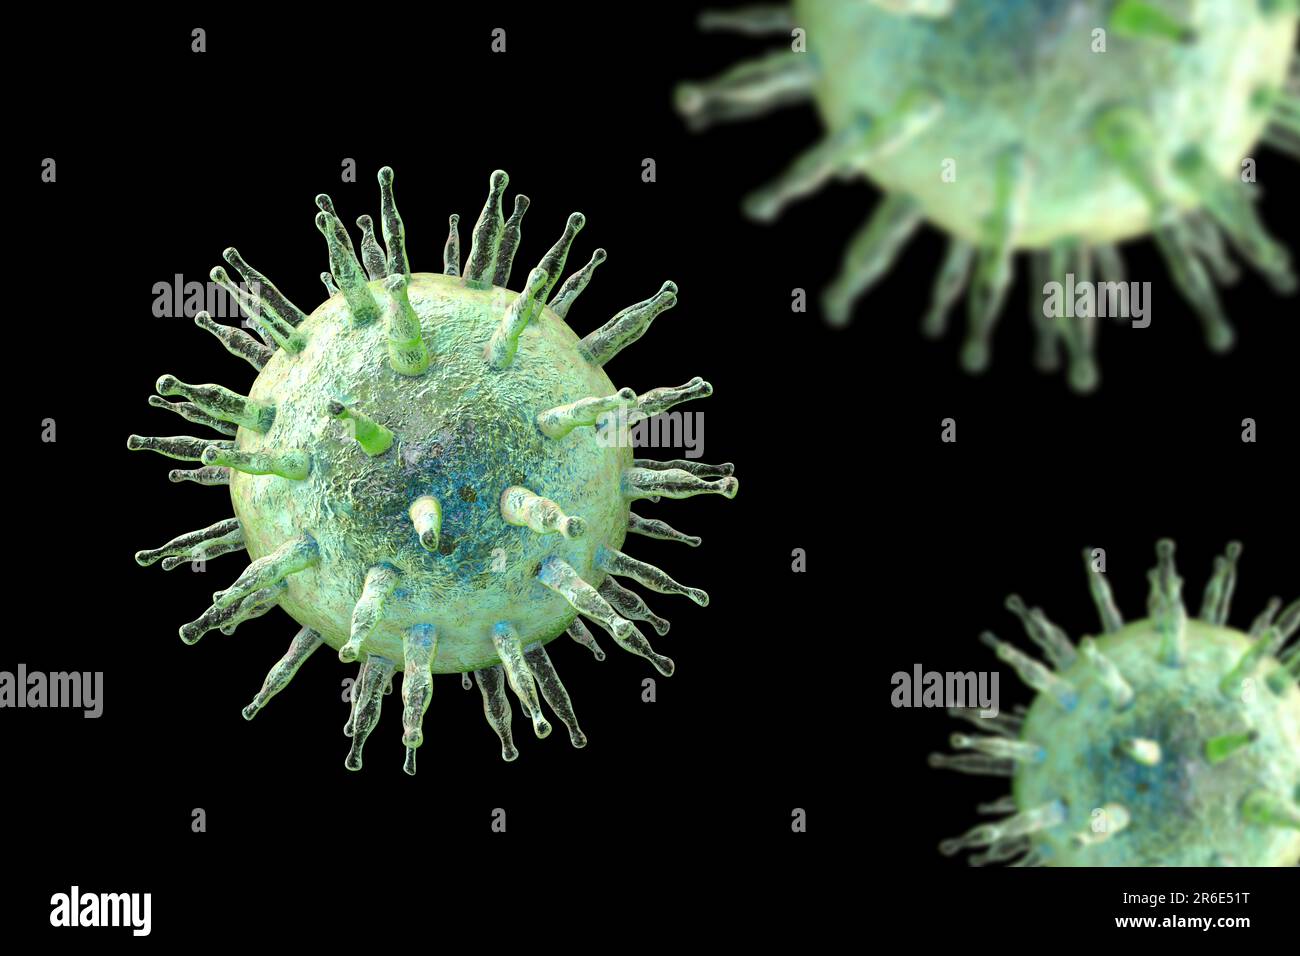 Epstein-Barr virus (EBV), computer illustration. EBV, also known as human herpes virus 4, is 1 of 8 herpes viruses that infects humans. It is best kno Stock Photo